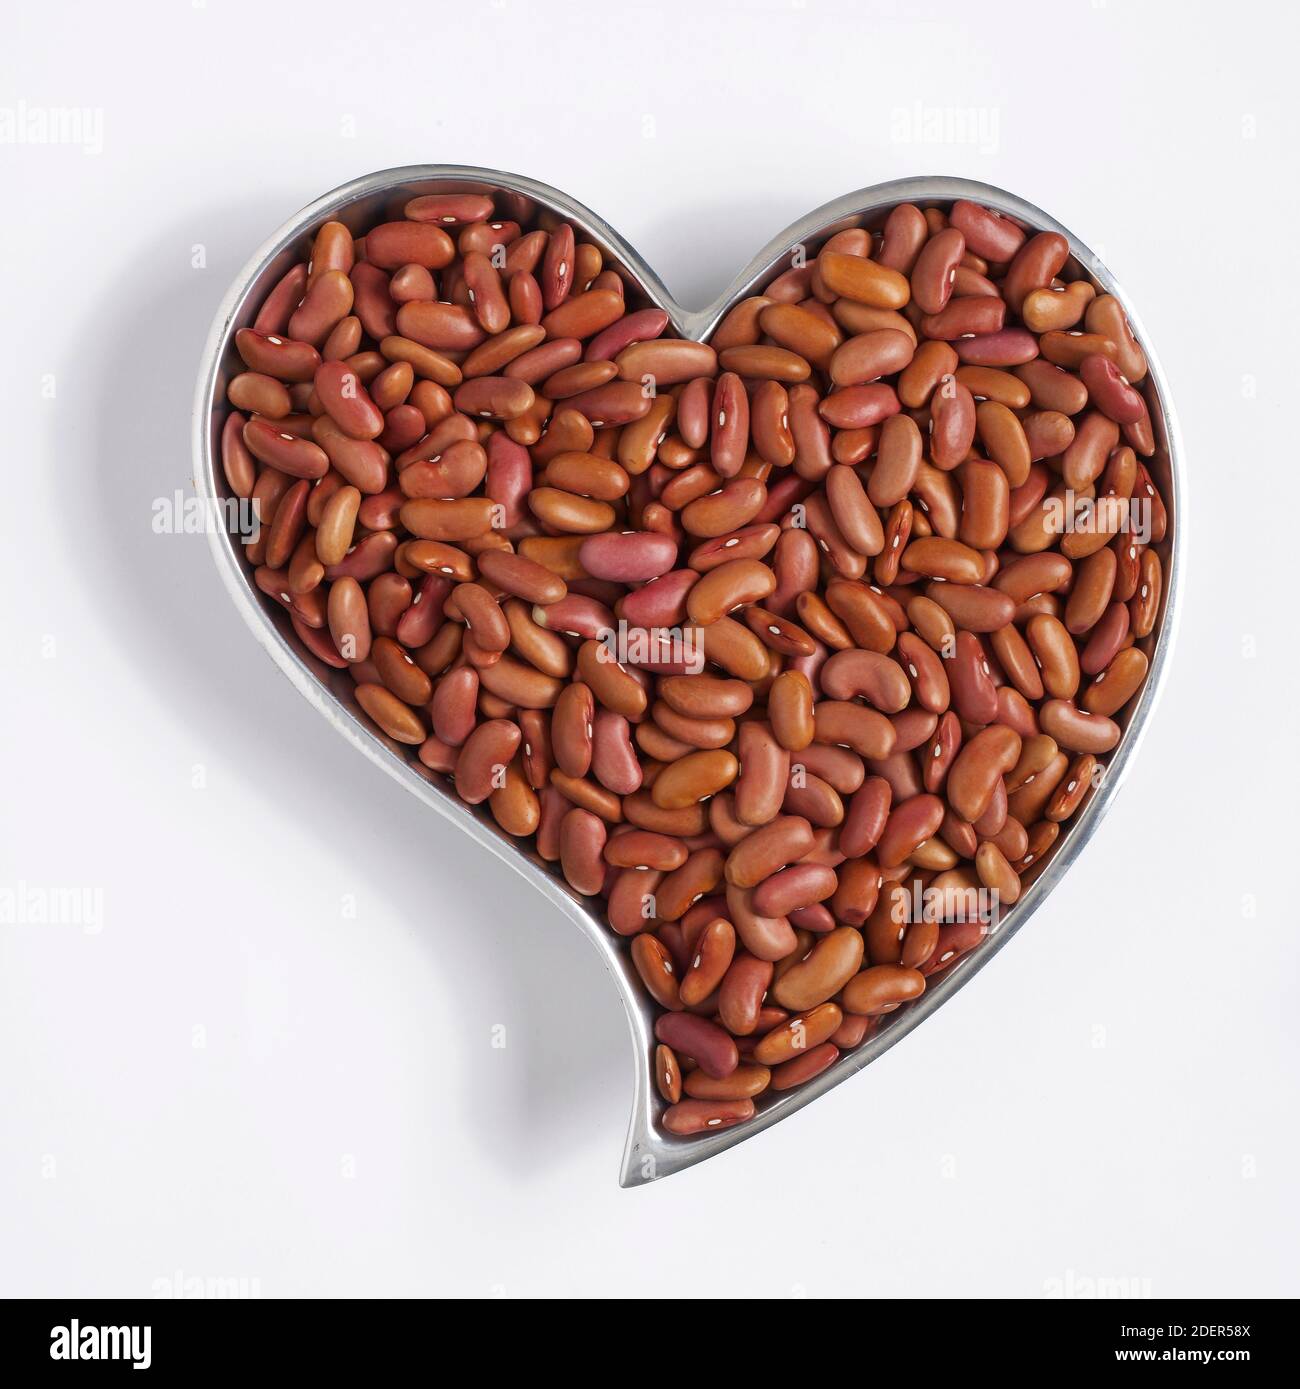 kidney beans in heart-shaped container Stock Photo